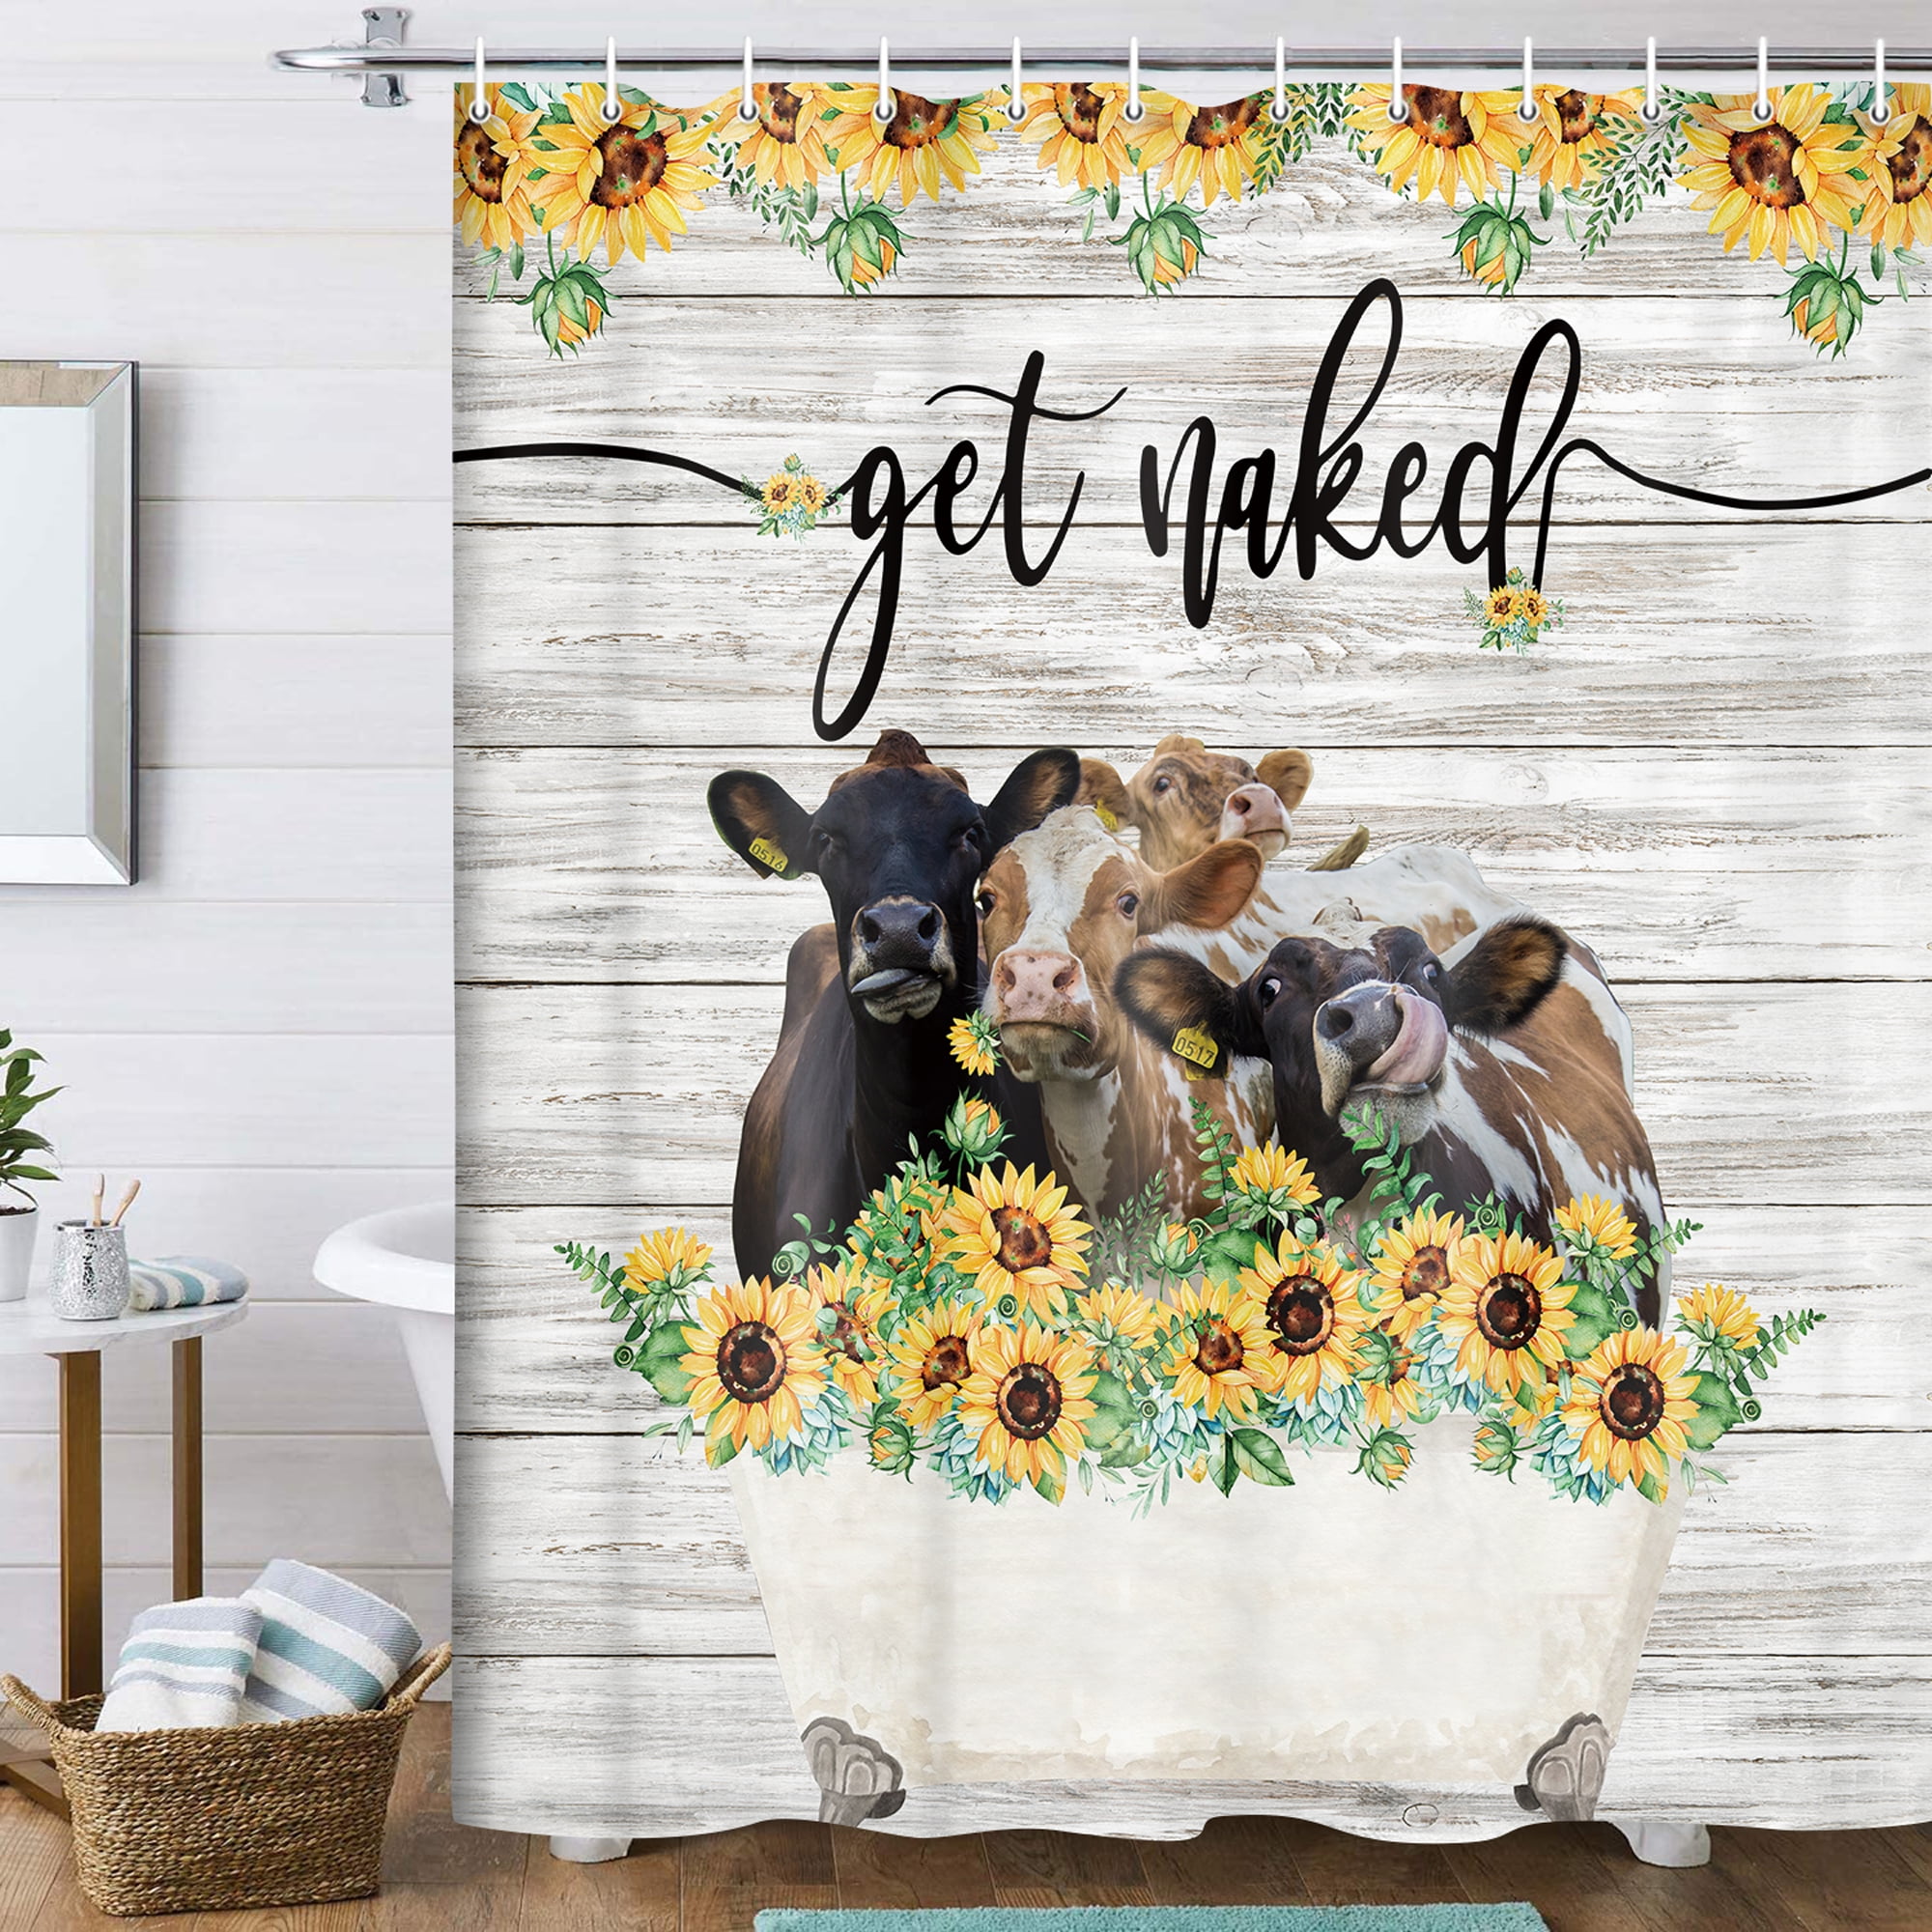 Details about   Farmhouse Highland Cow Flower Shower Curtain Funny Word Get Naked Bathroom Decor 